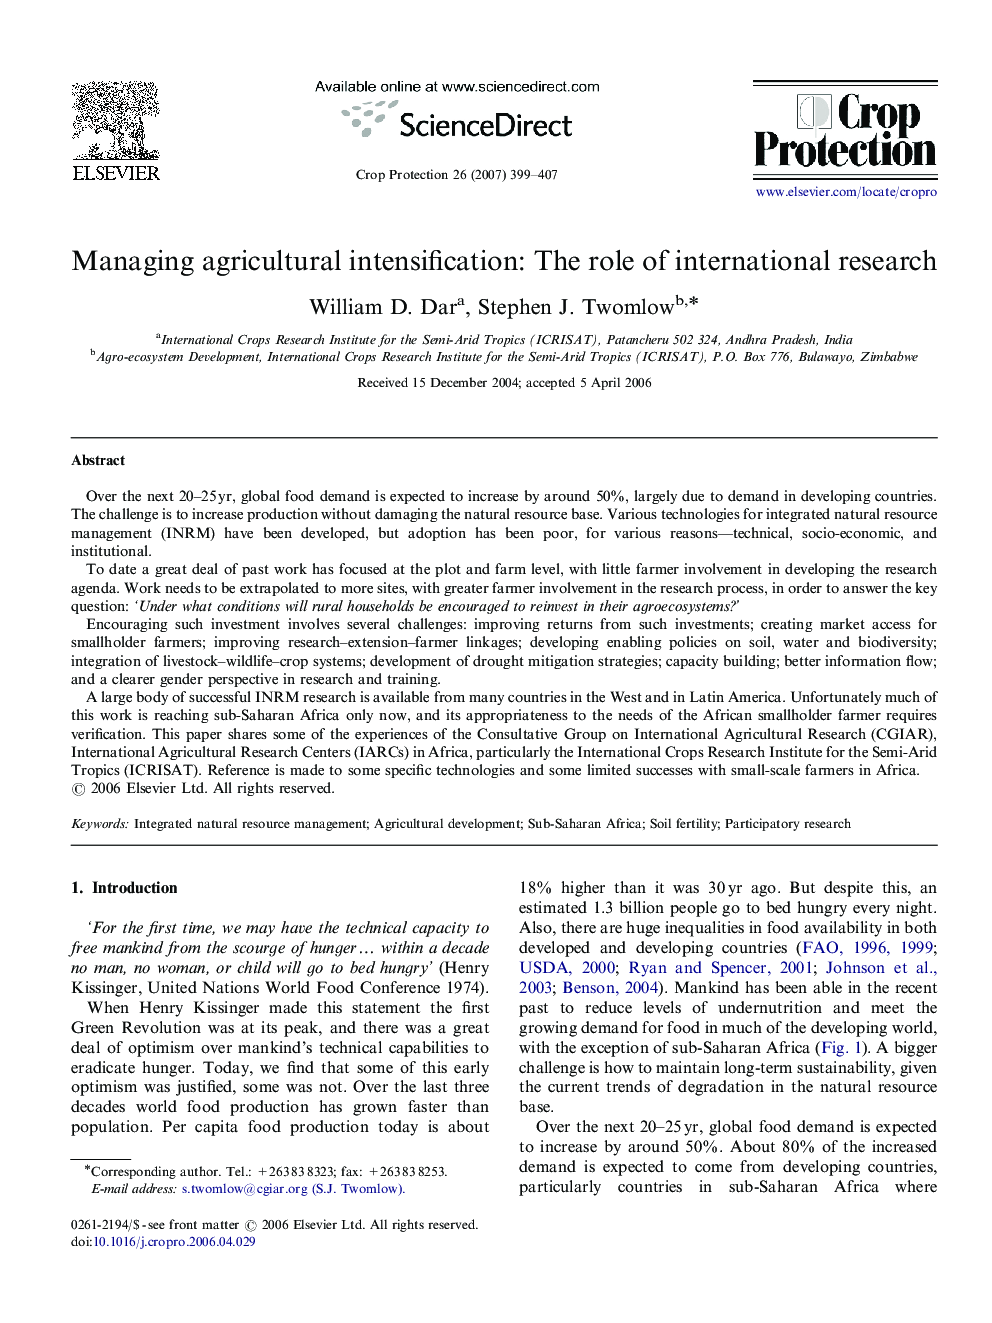 Managing agricultural intensification: The role of international research